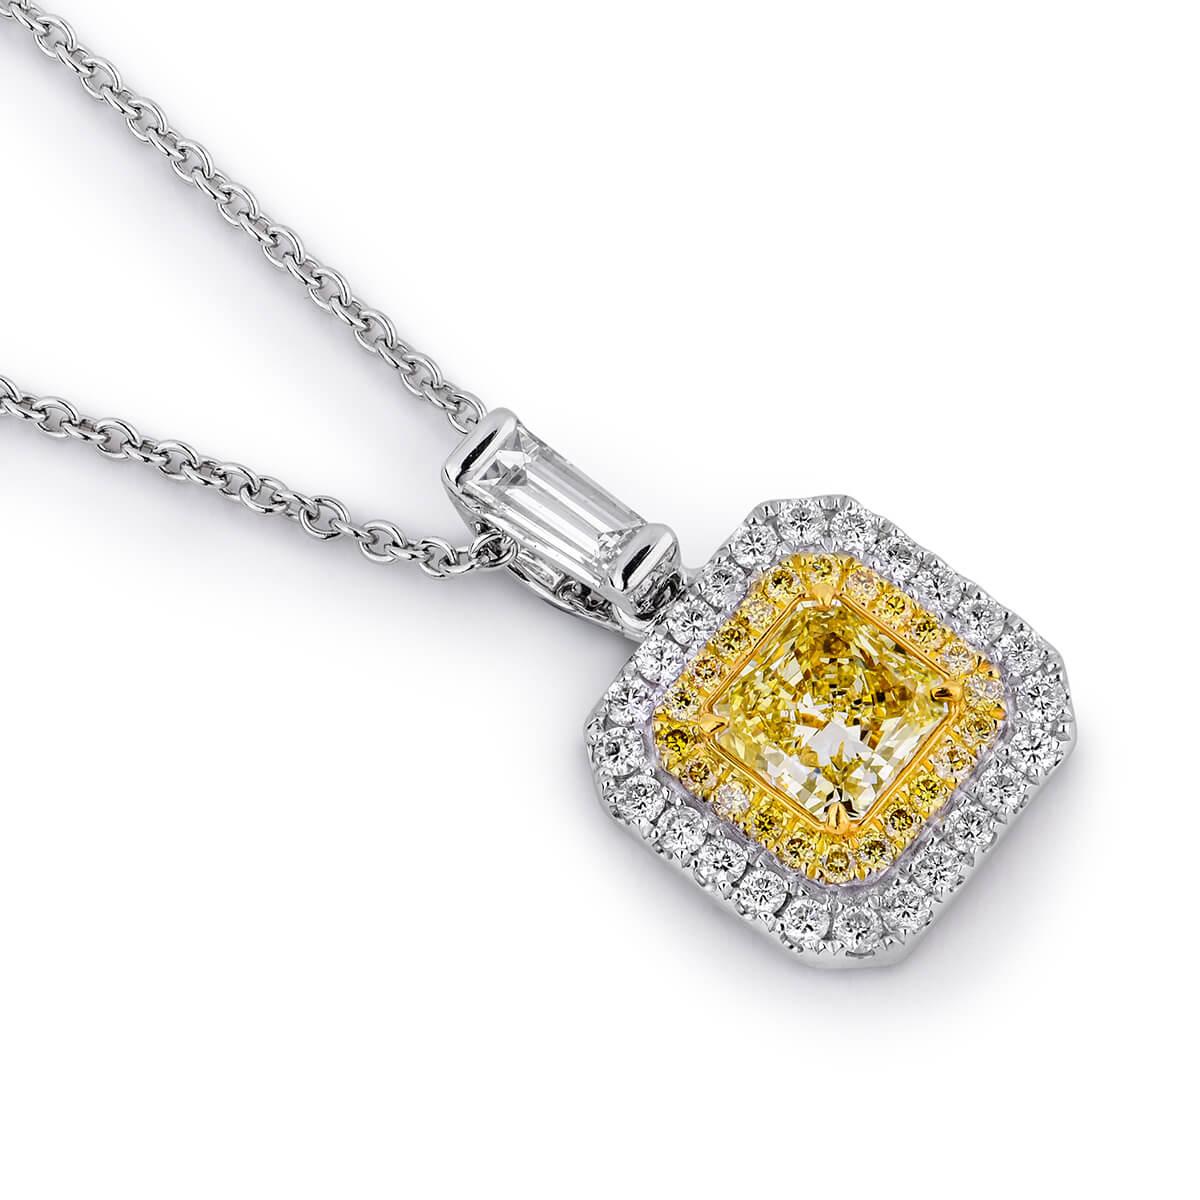 Women's or Men's Natural Untreated Fancy Yellow Diamond 1.11 Carat Radiant Shape Necklace